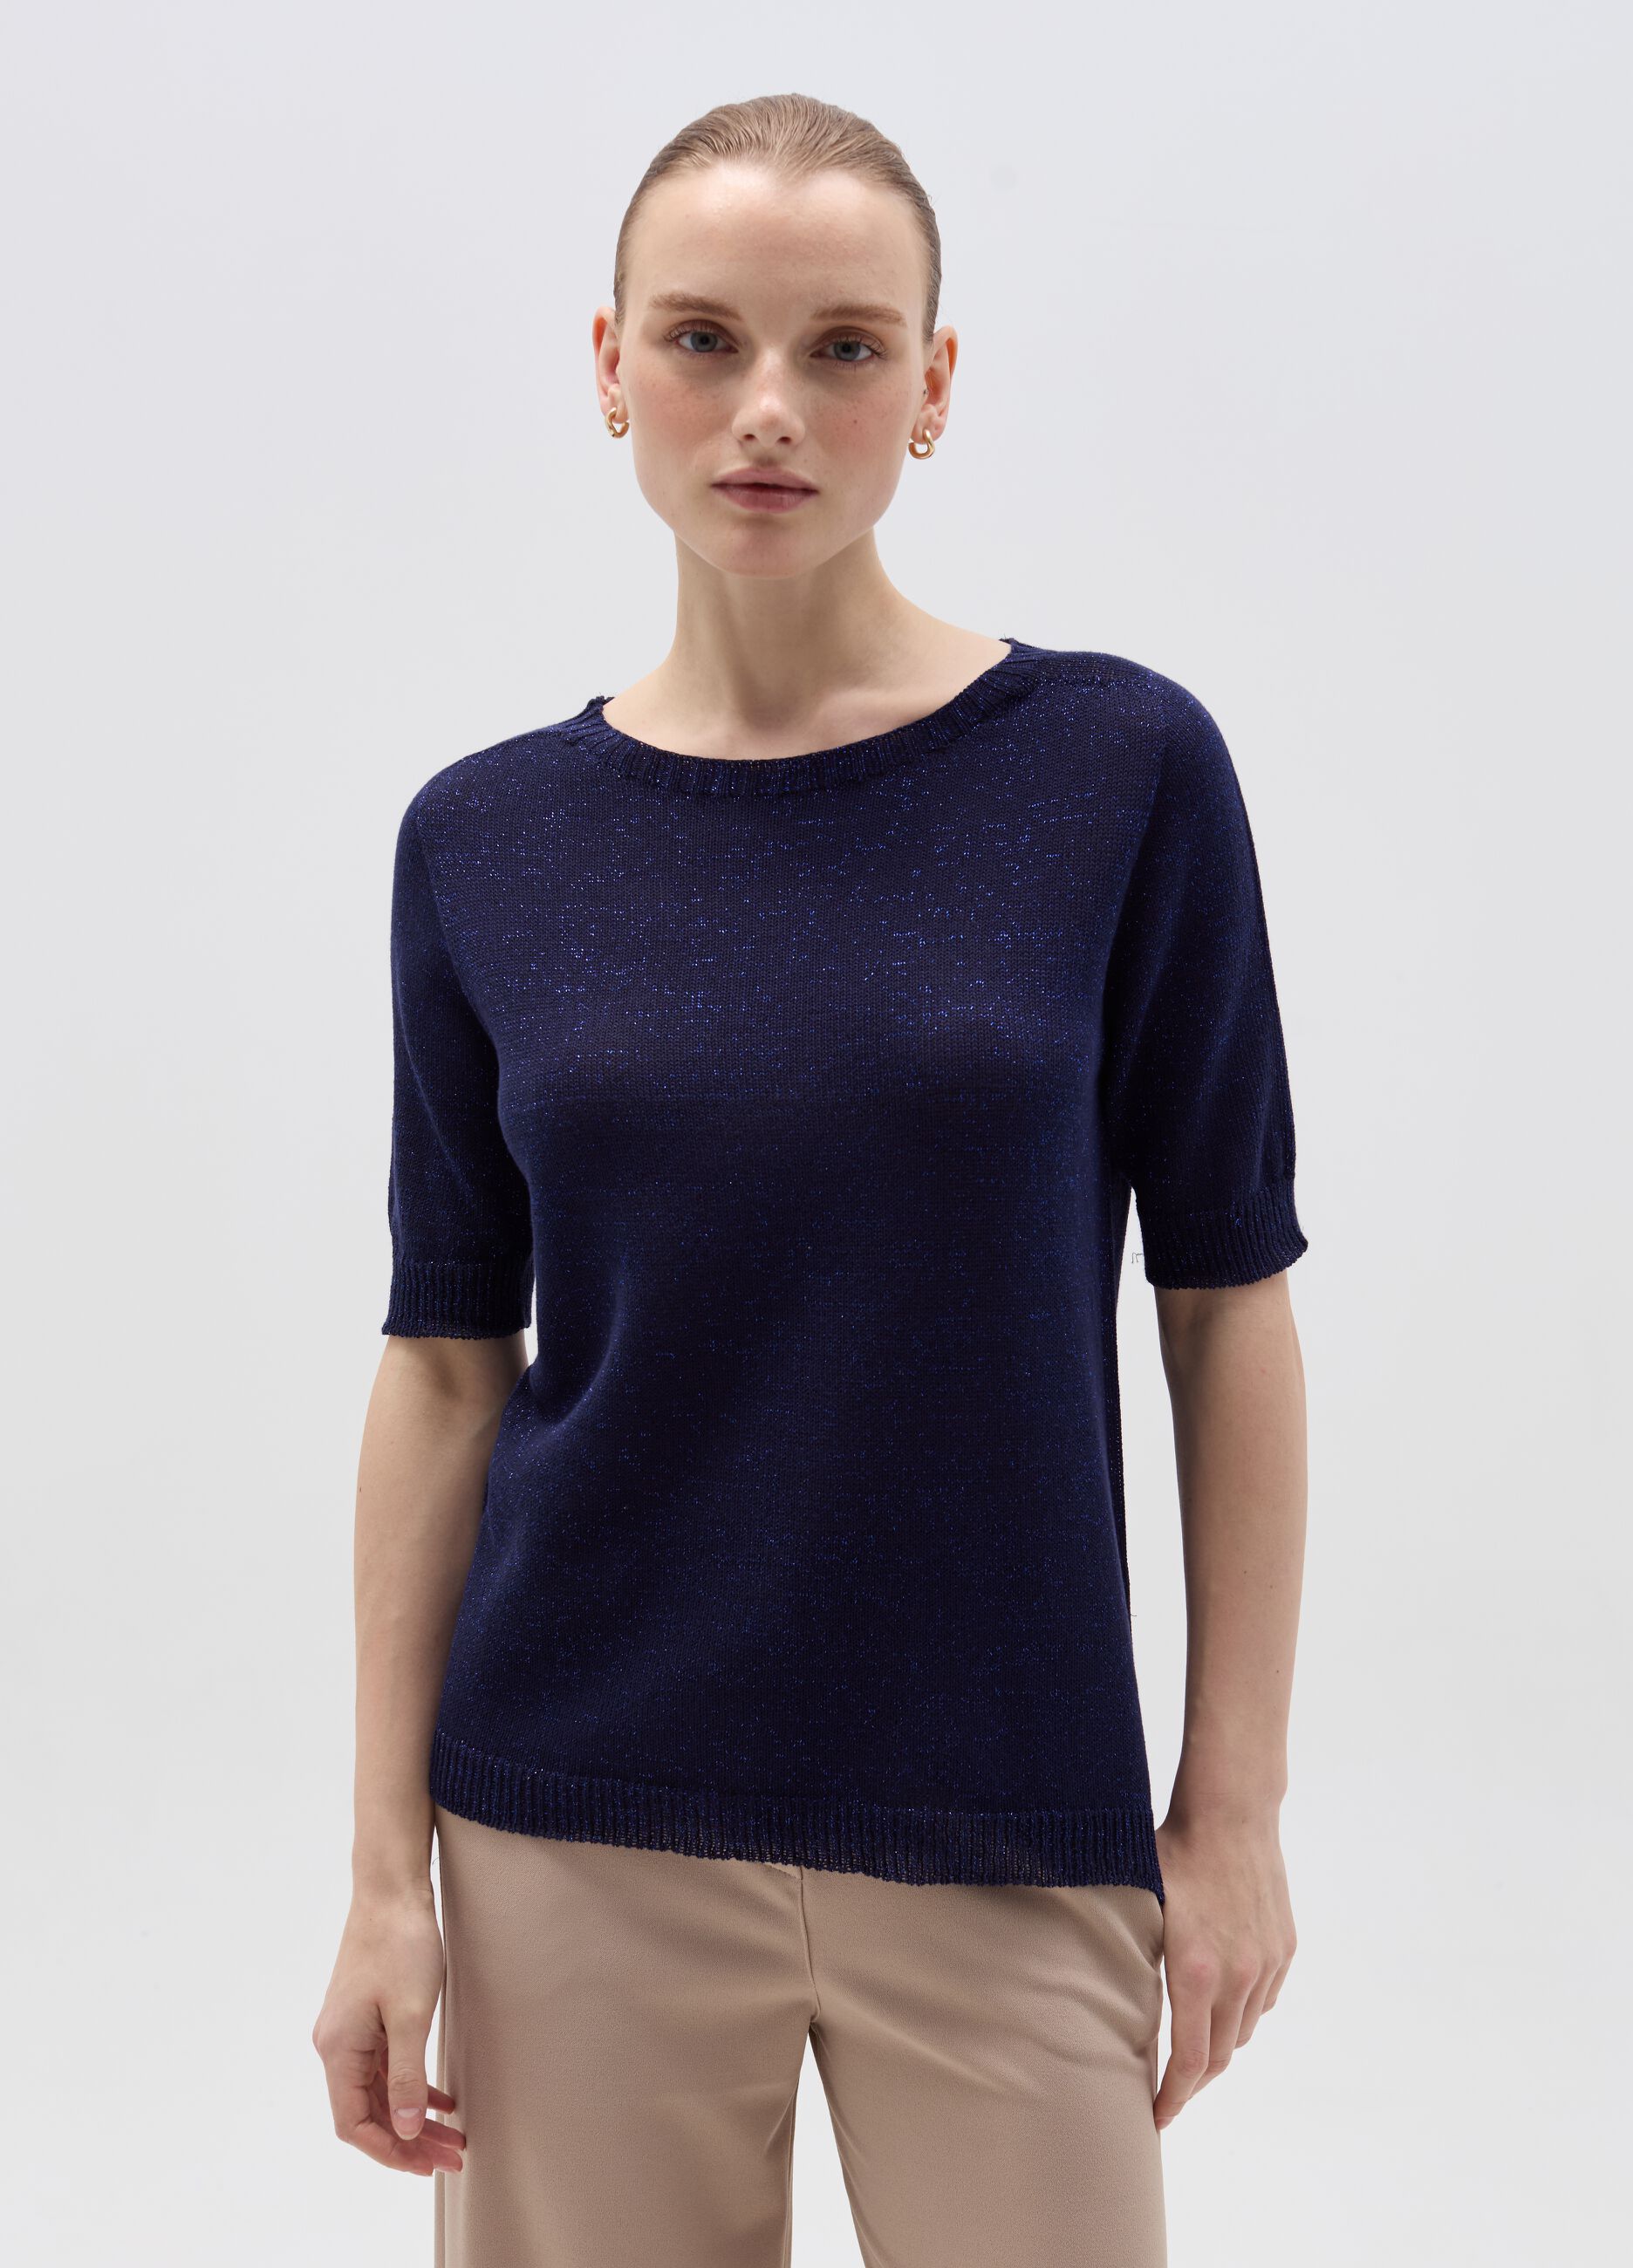 Lurex top with short sleeves